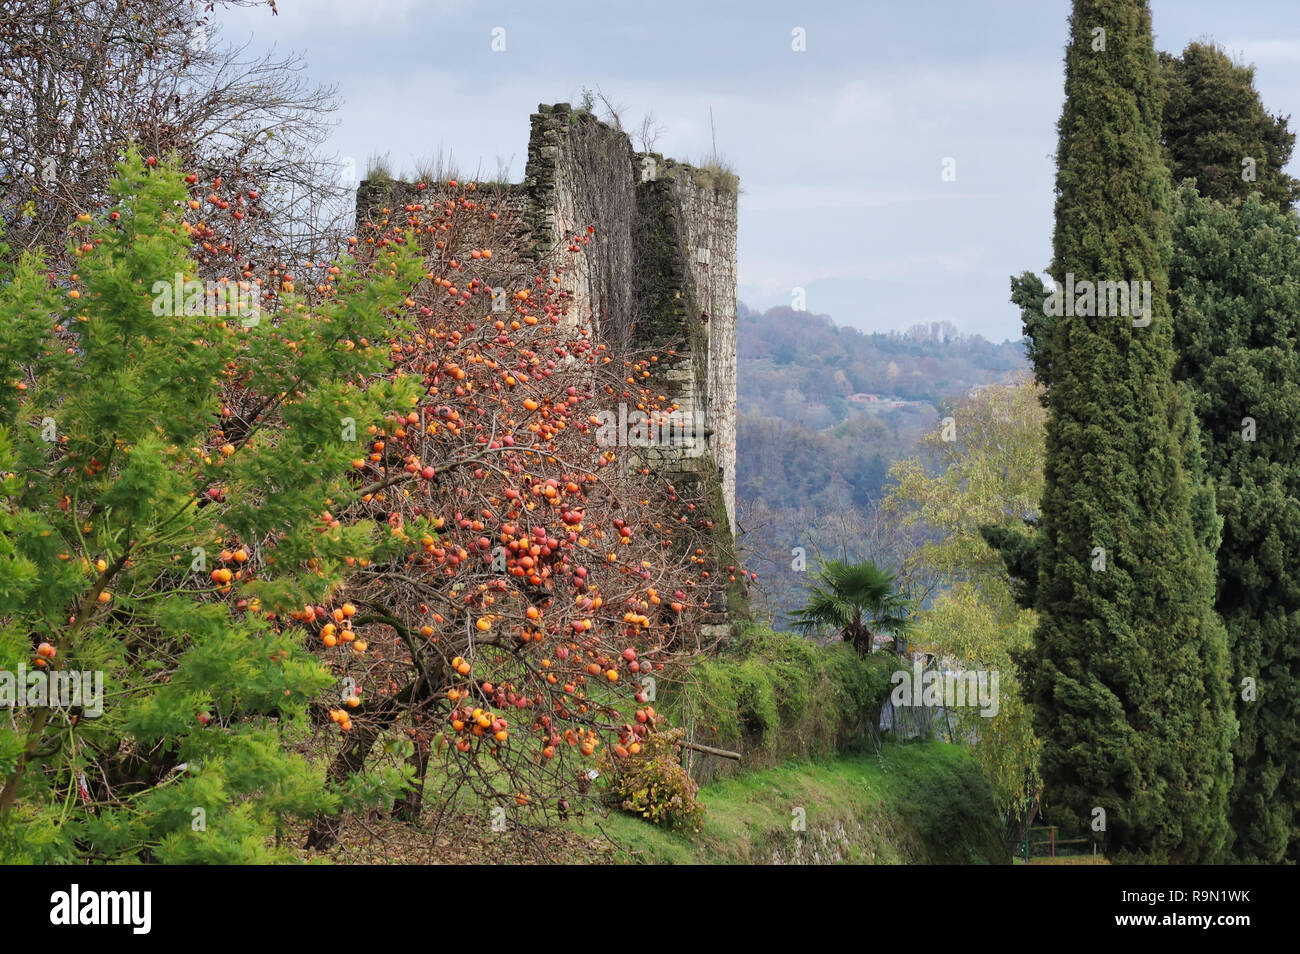 ripe fruits on persimmon trees in december, Arona, Italy Stock Photo